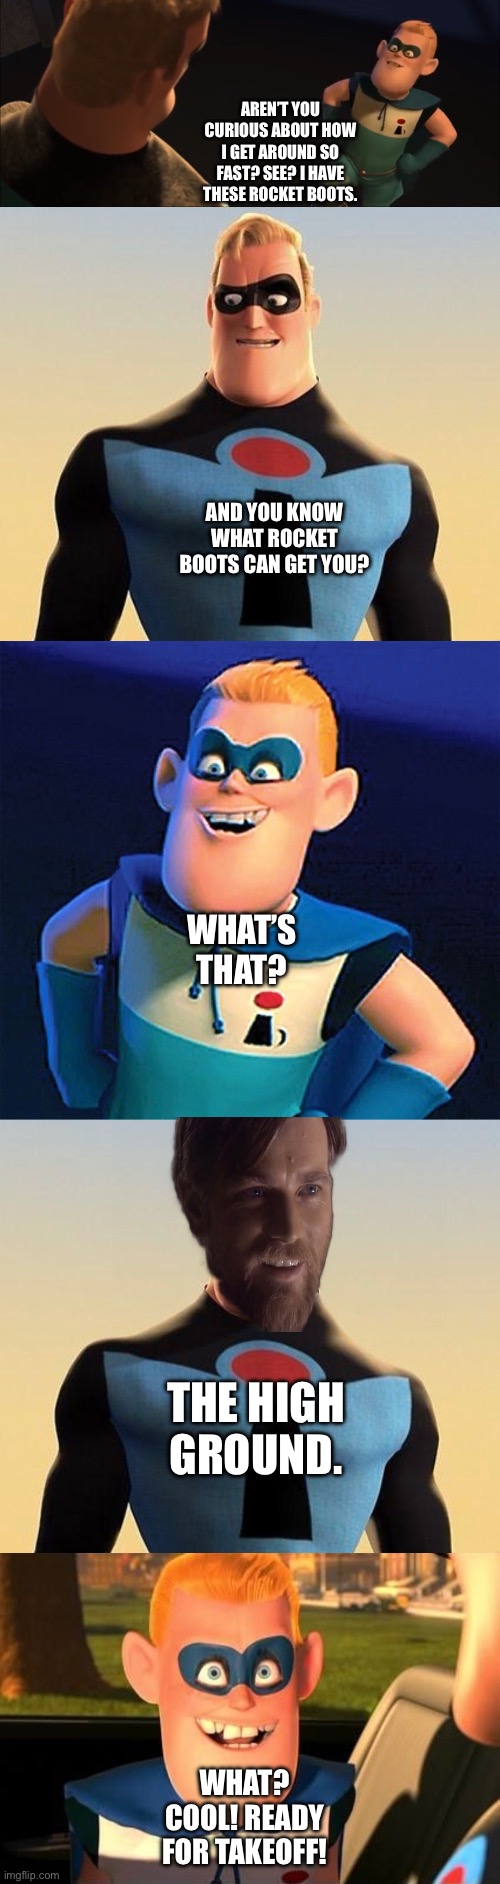 Mr. Incredible gives a funny and very friendly comment to Buddy Pine/IncrediBoy’s Rocket Boots | AREN’T YOU CURIOUS ABOUT HOW I GET AROUND SO FAST? SEE? I HAVE THESE ROCKET BOOTS. AND YOU KNOW WHAT ROCKET BOOTS CAN GET YOU? WHAT’S THAT? THE HIGH GROUND. WHAT? COOL! READY FOR TAKEOFF! | image tagged in funny memes,what if,the incredibles,the high ground,obi wan kenobi,star wars | made w/ Imgflip meme maker